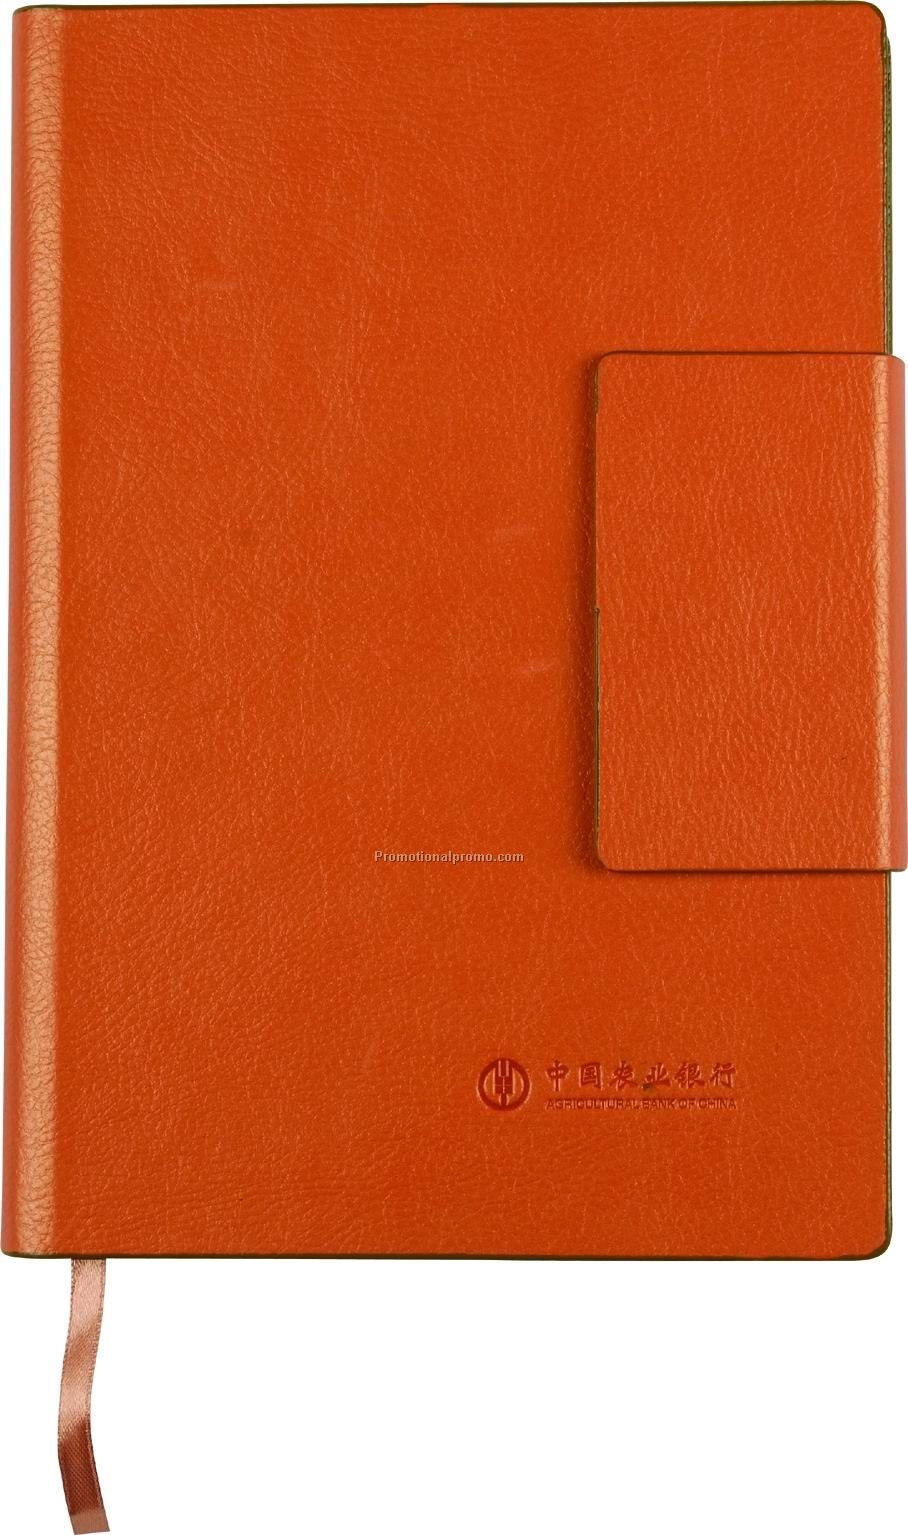 Hot diary or agenda promotional PU notebook